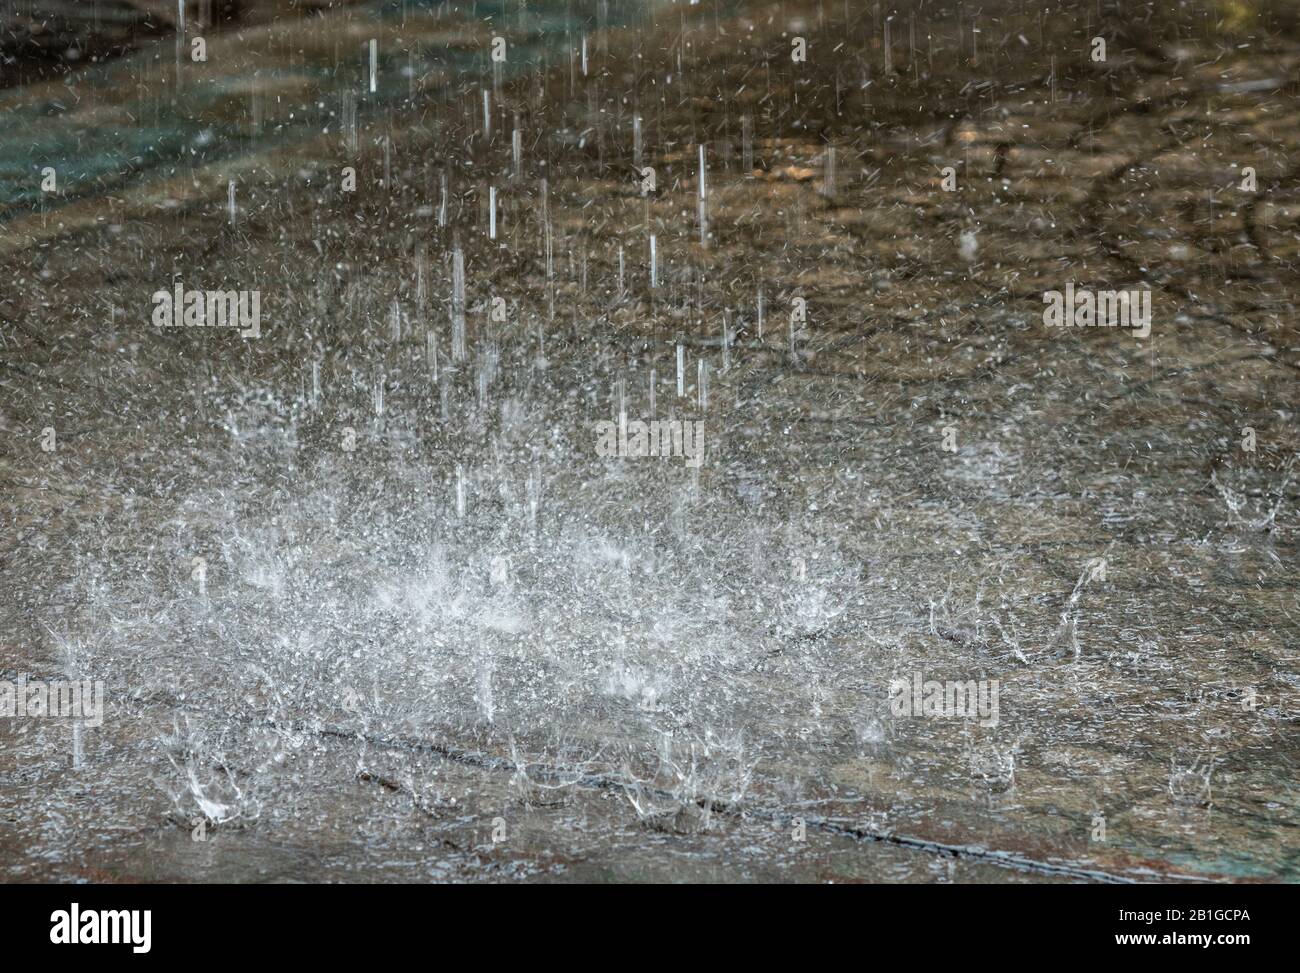 raindrops falling in a torrential downpour on a pavement during heavy weather in the wet winter causing flooding. Stock Photo